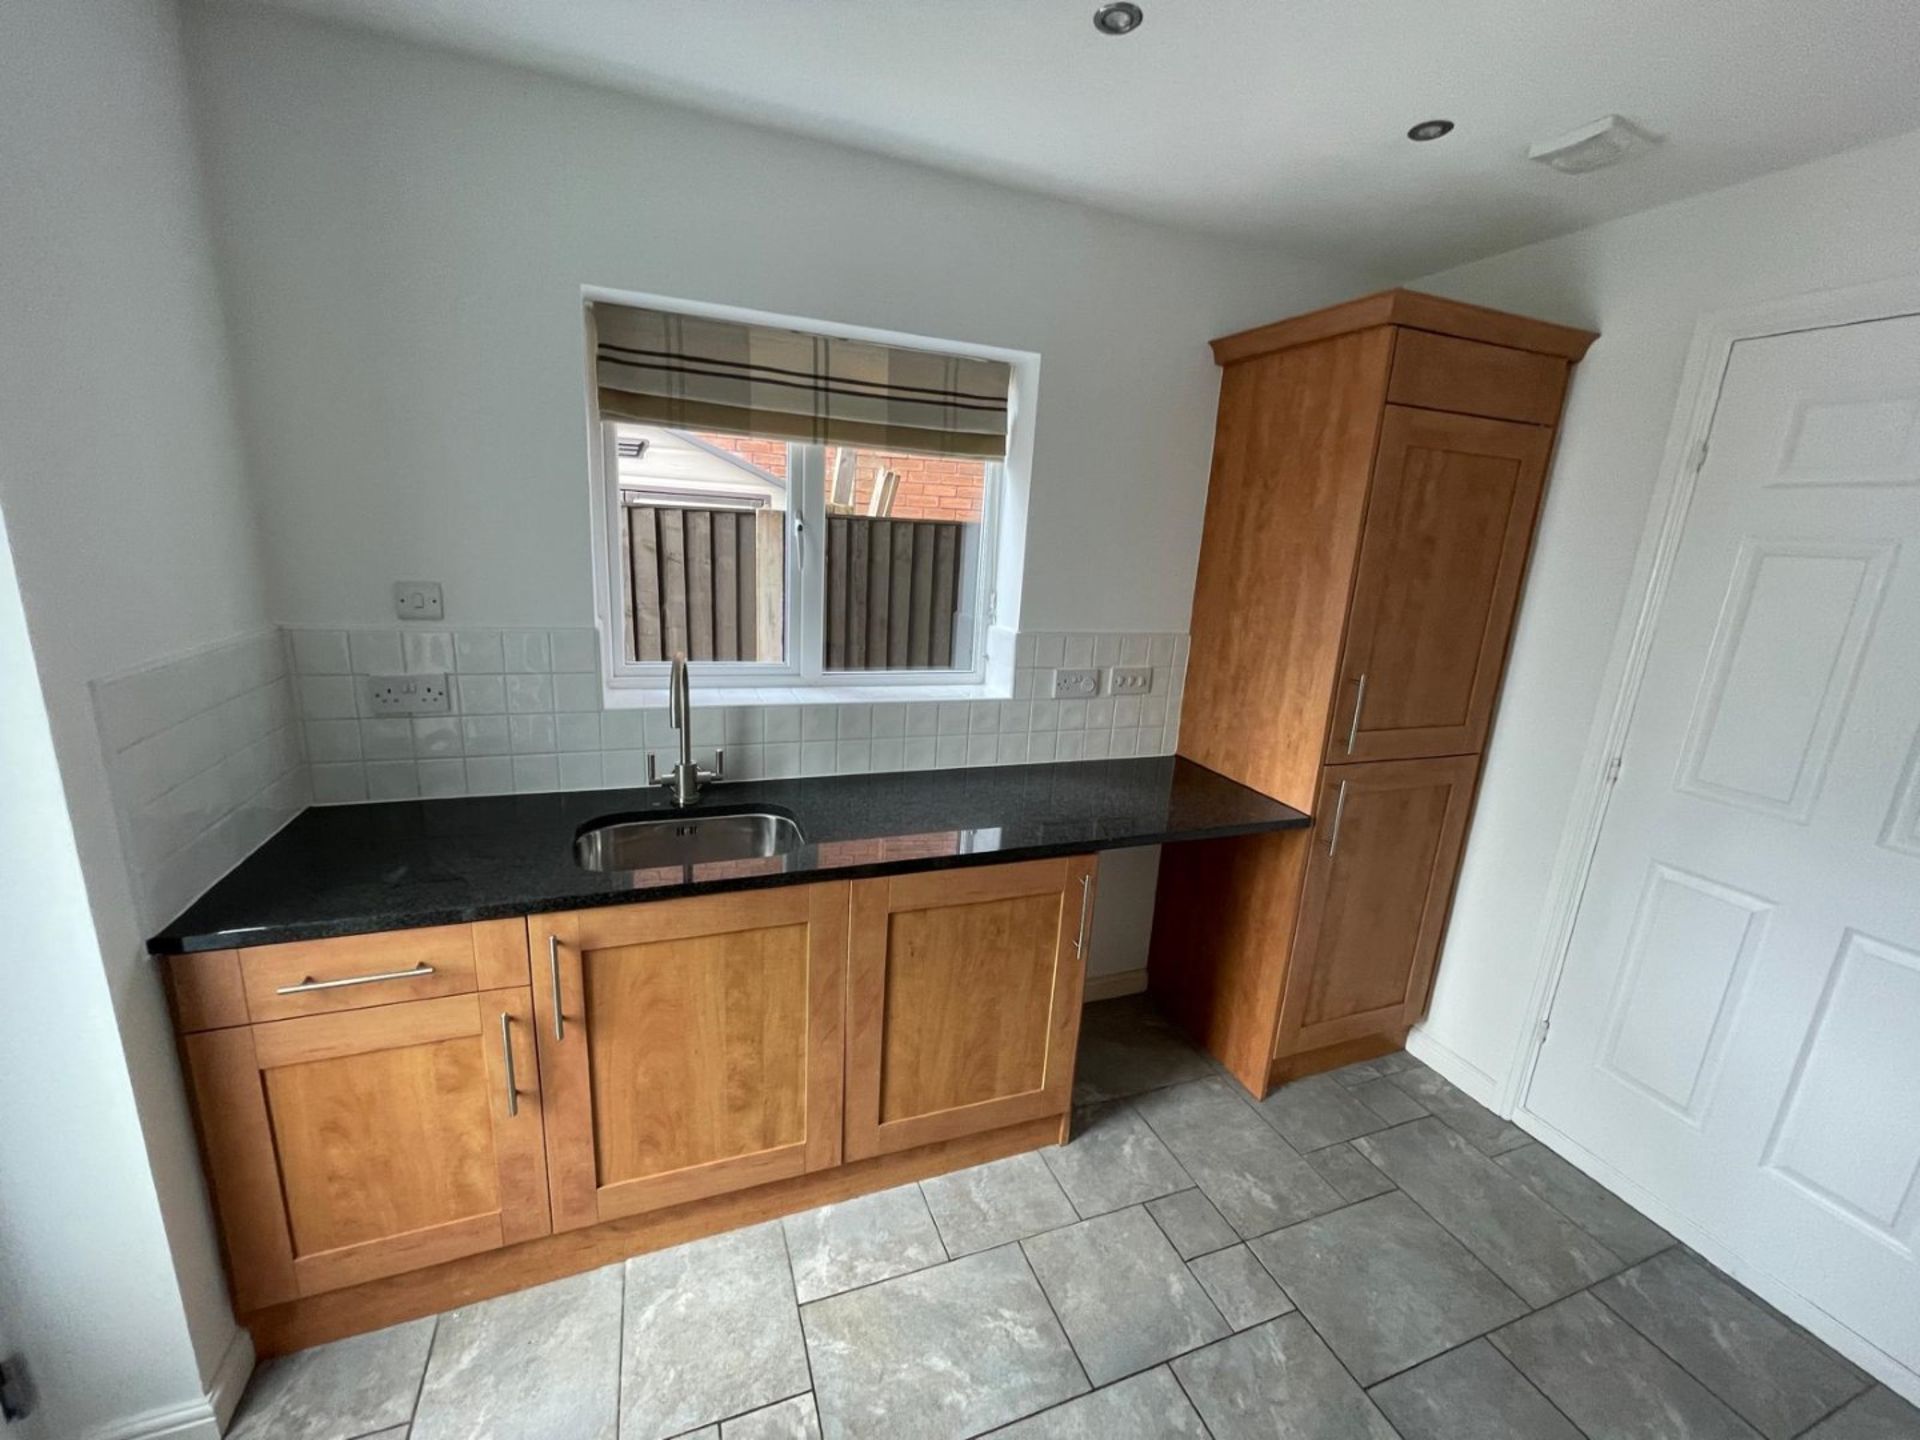 1 x Shaker-style, Feature-rich Fitted Kitchen with Solid Wood Doors, Granite Worktops and Appliances - Image 28 of 111